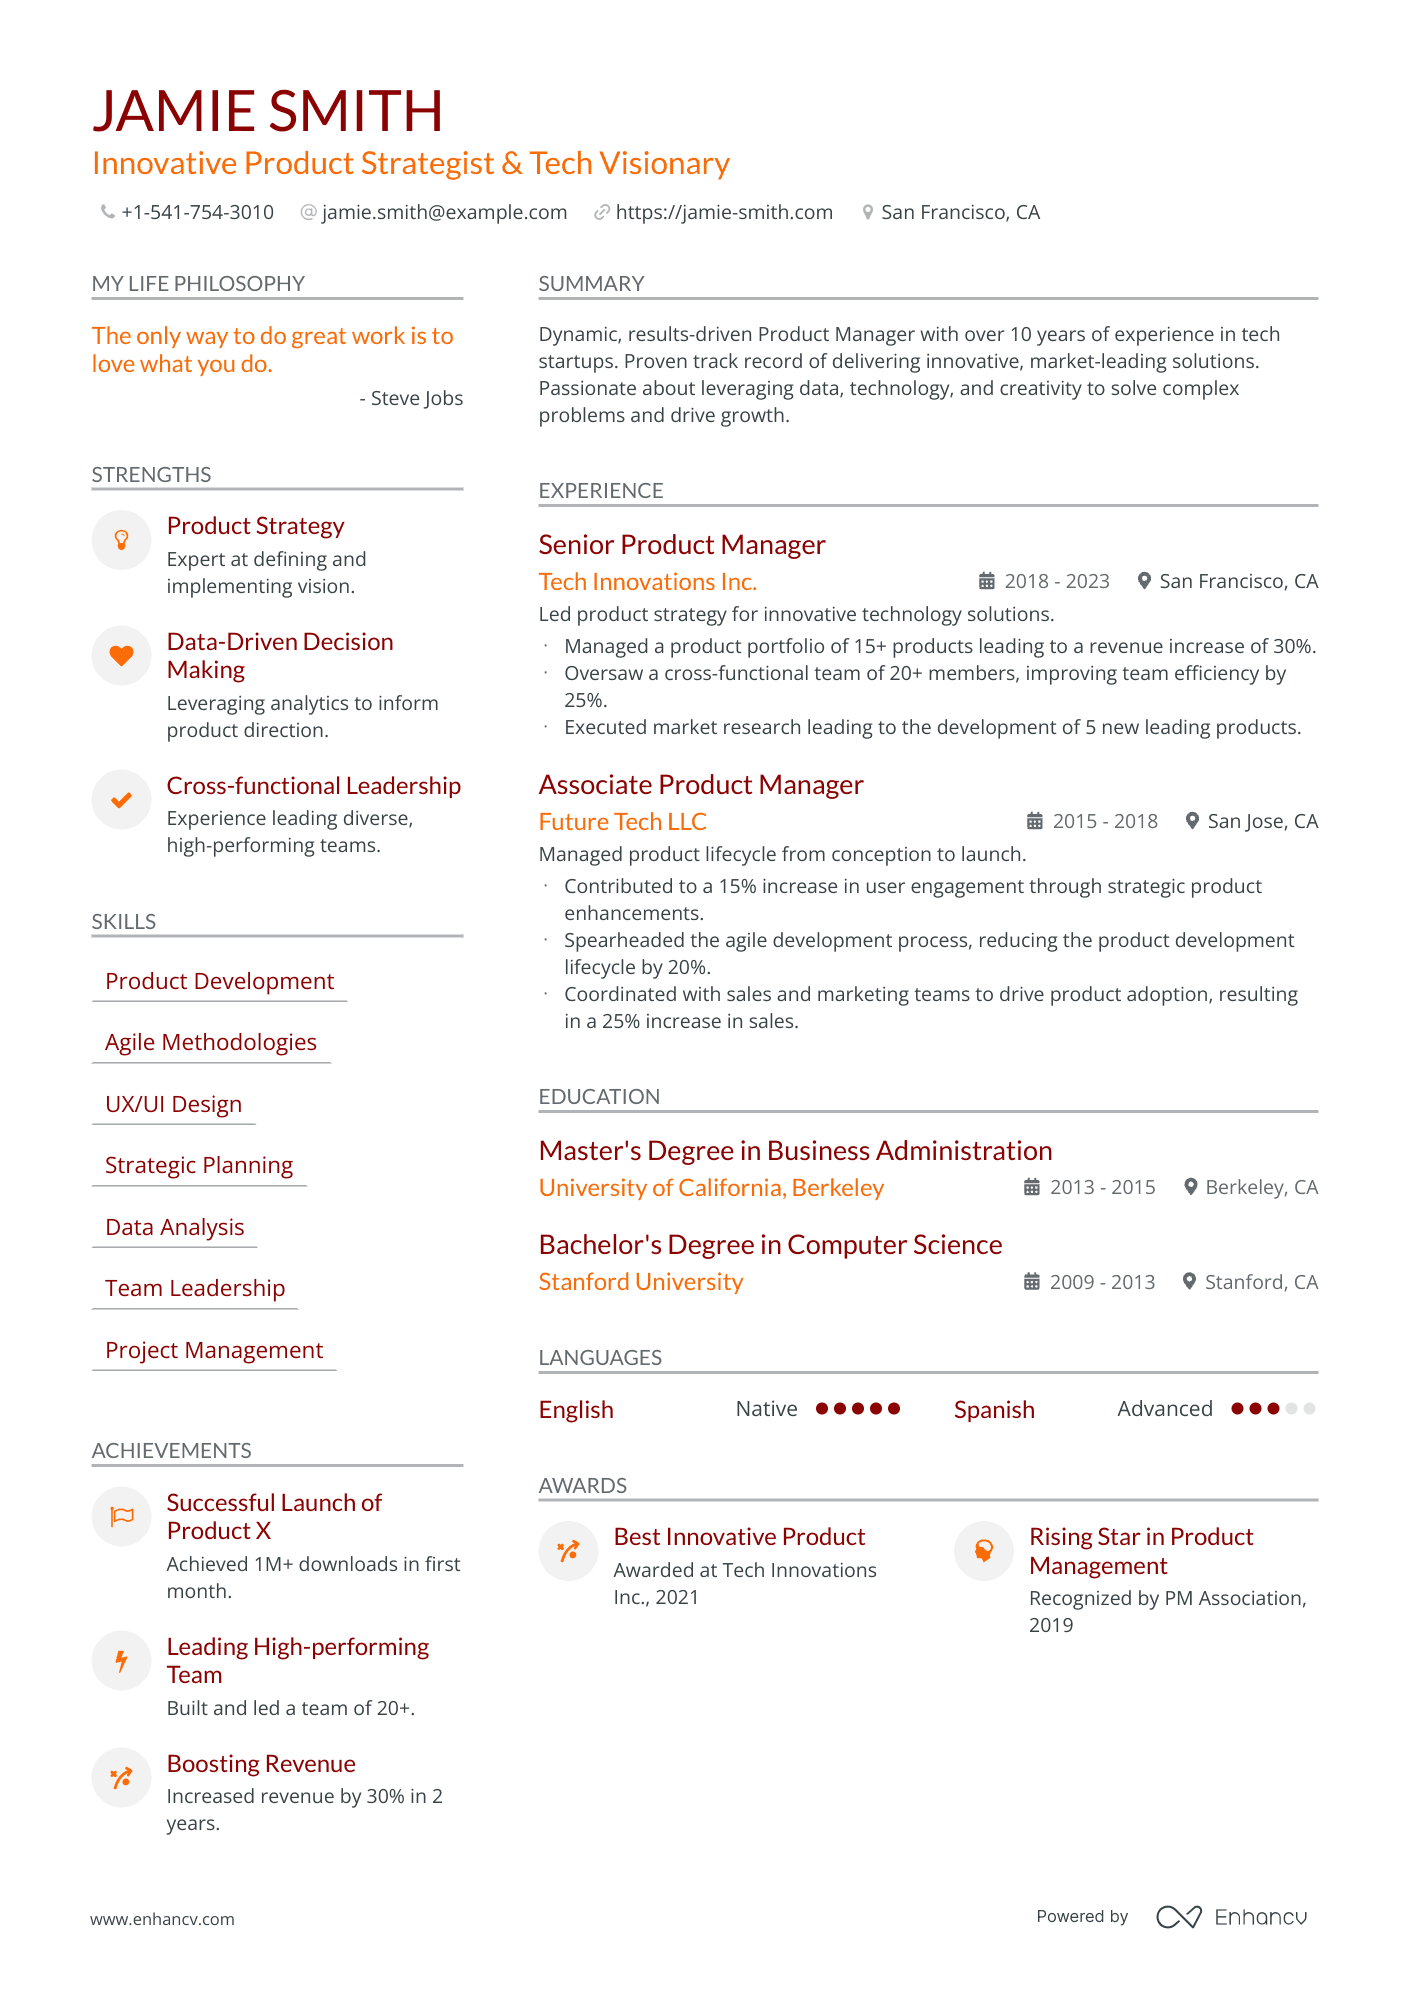 Innovative Product Strategist & Tech Visionary resume example